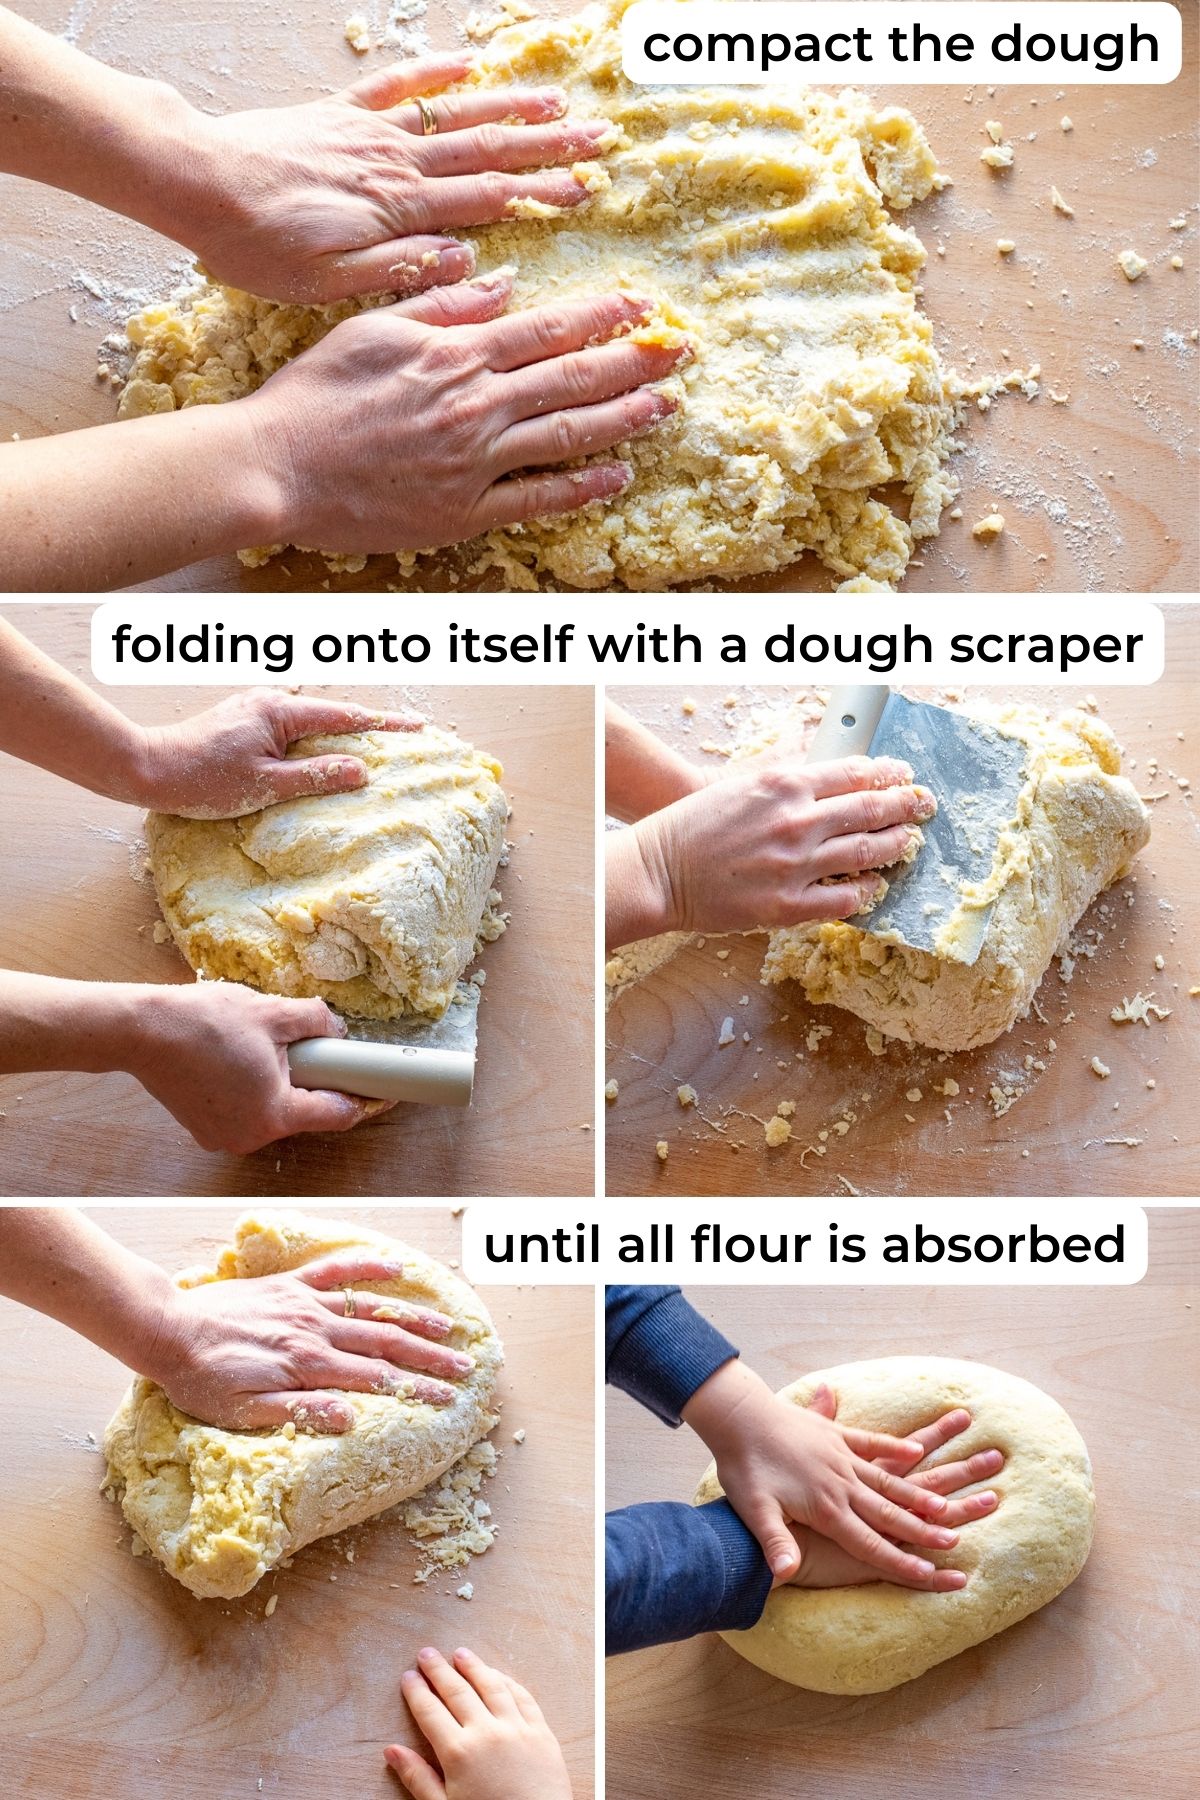 Compacting the dough together using hands and a dough scraper.